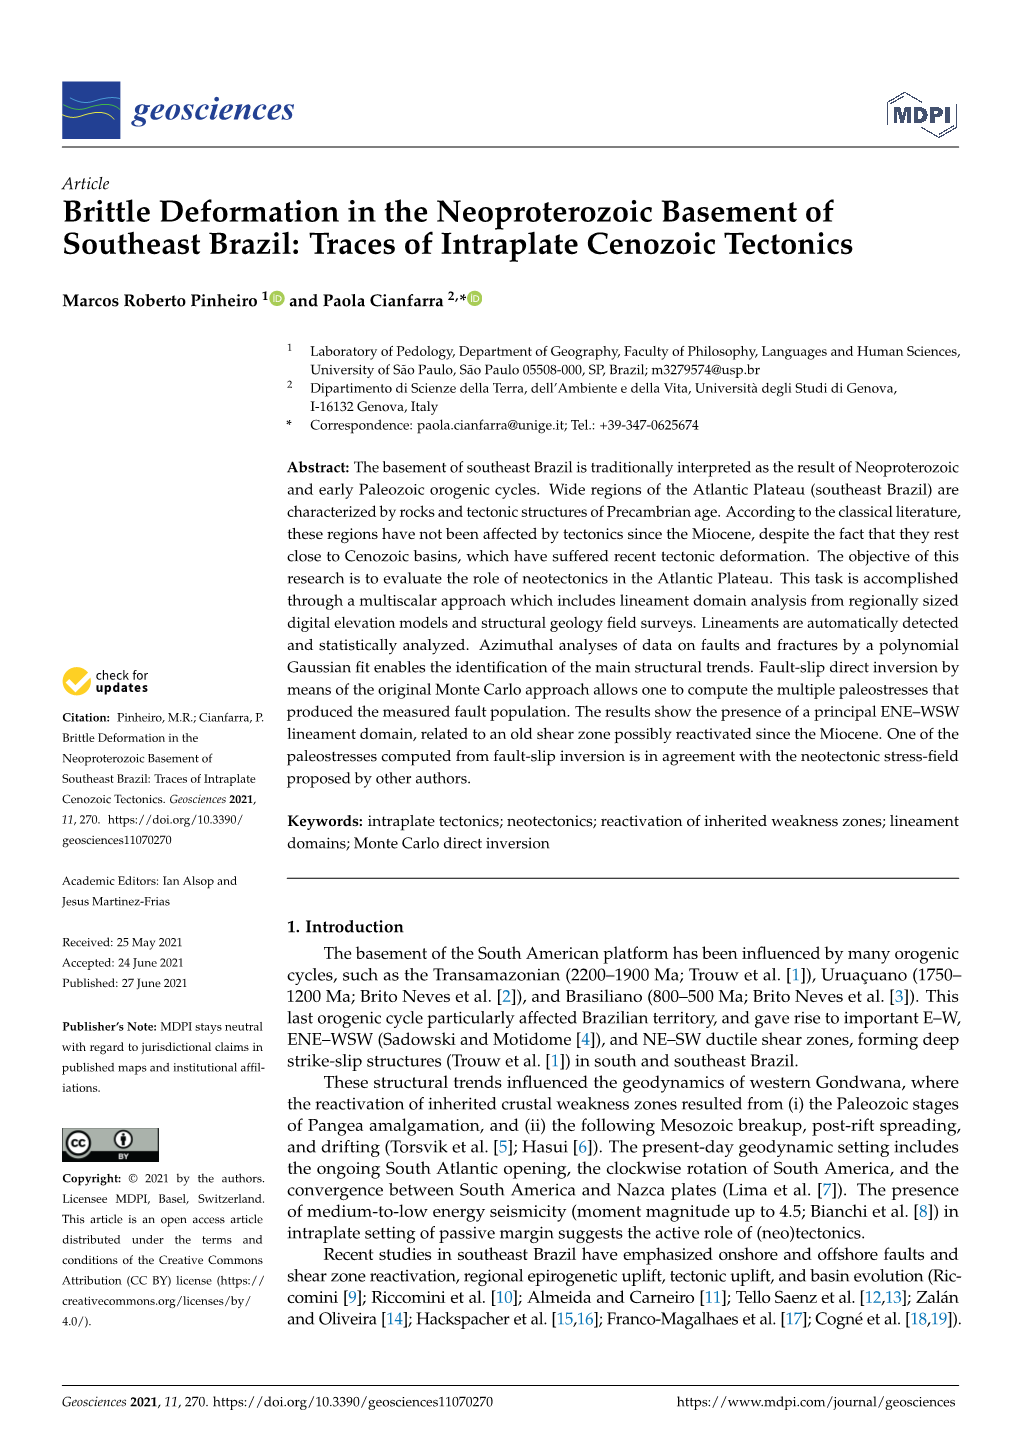 Brittle Deformation in the Neoproterozoic Basement of Southeast Brazil: Traces of Intraplate Cenozoic Tectonics